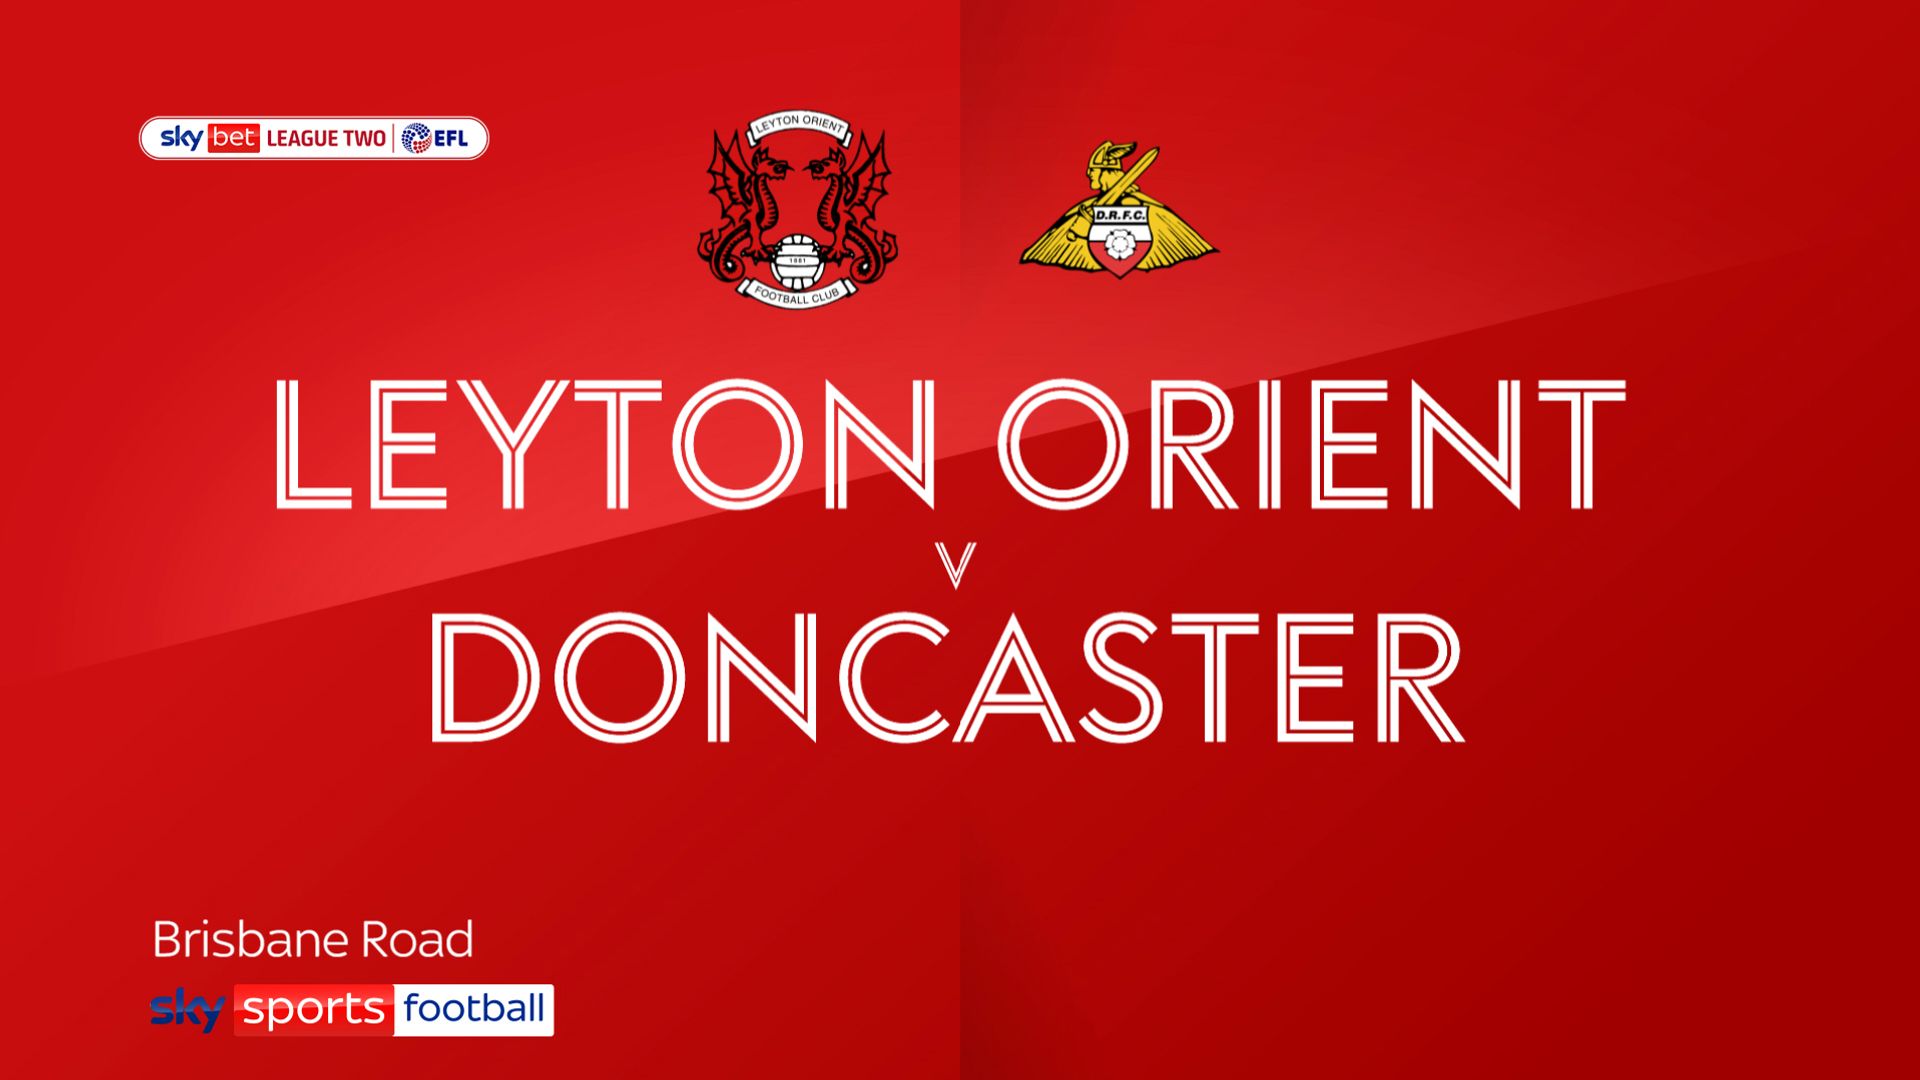 Archibald scores glorious winner as Orient see off Doncaster